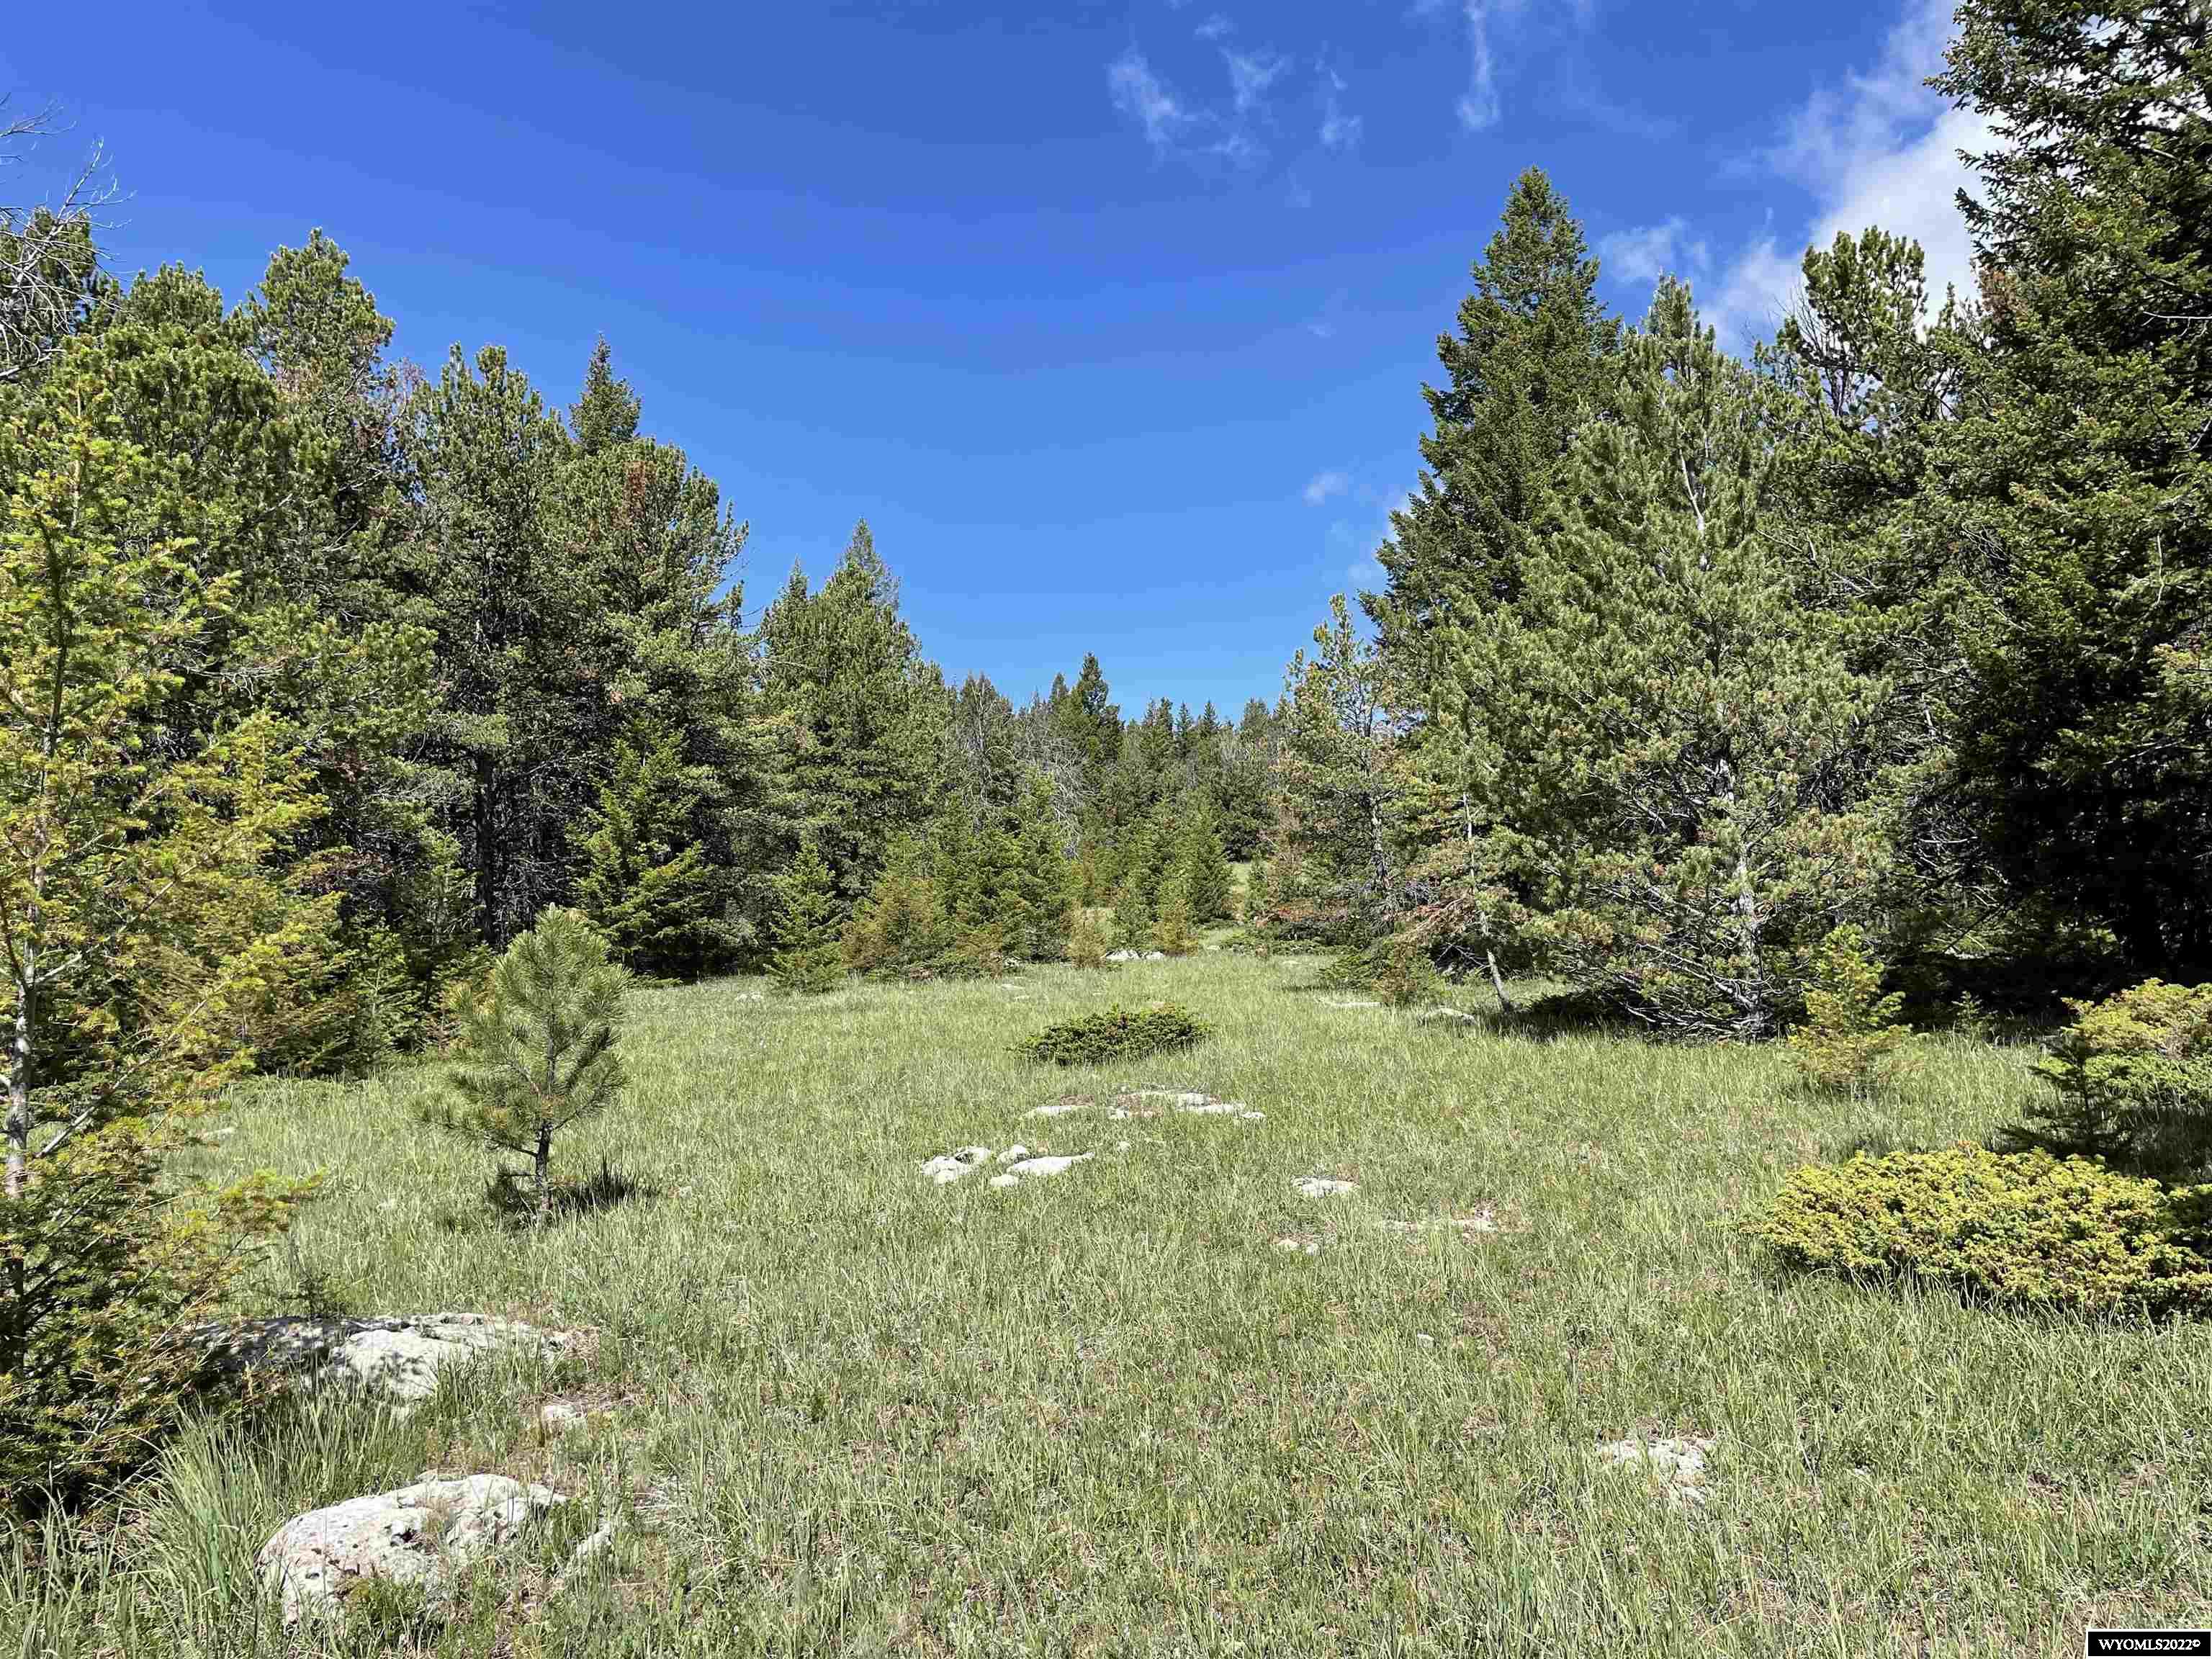 Beautiful and secluded mountain property off of Billy Creek Road.  Tremendous views, heavily treed in some areas plus open meadows.  You have it all! There is a small cabin on the property that is in good condition with a wood stove.  Sellers have partially set up a kitchenette in the cabin where they have hauled water. There are some beautiful cabin sites on this property. Great hunting property with bear, elk, deer, moose and blue grouse. Call Cristy Kinghorn 307-620-0037.